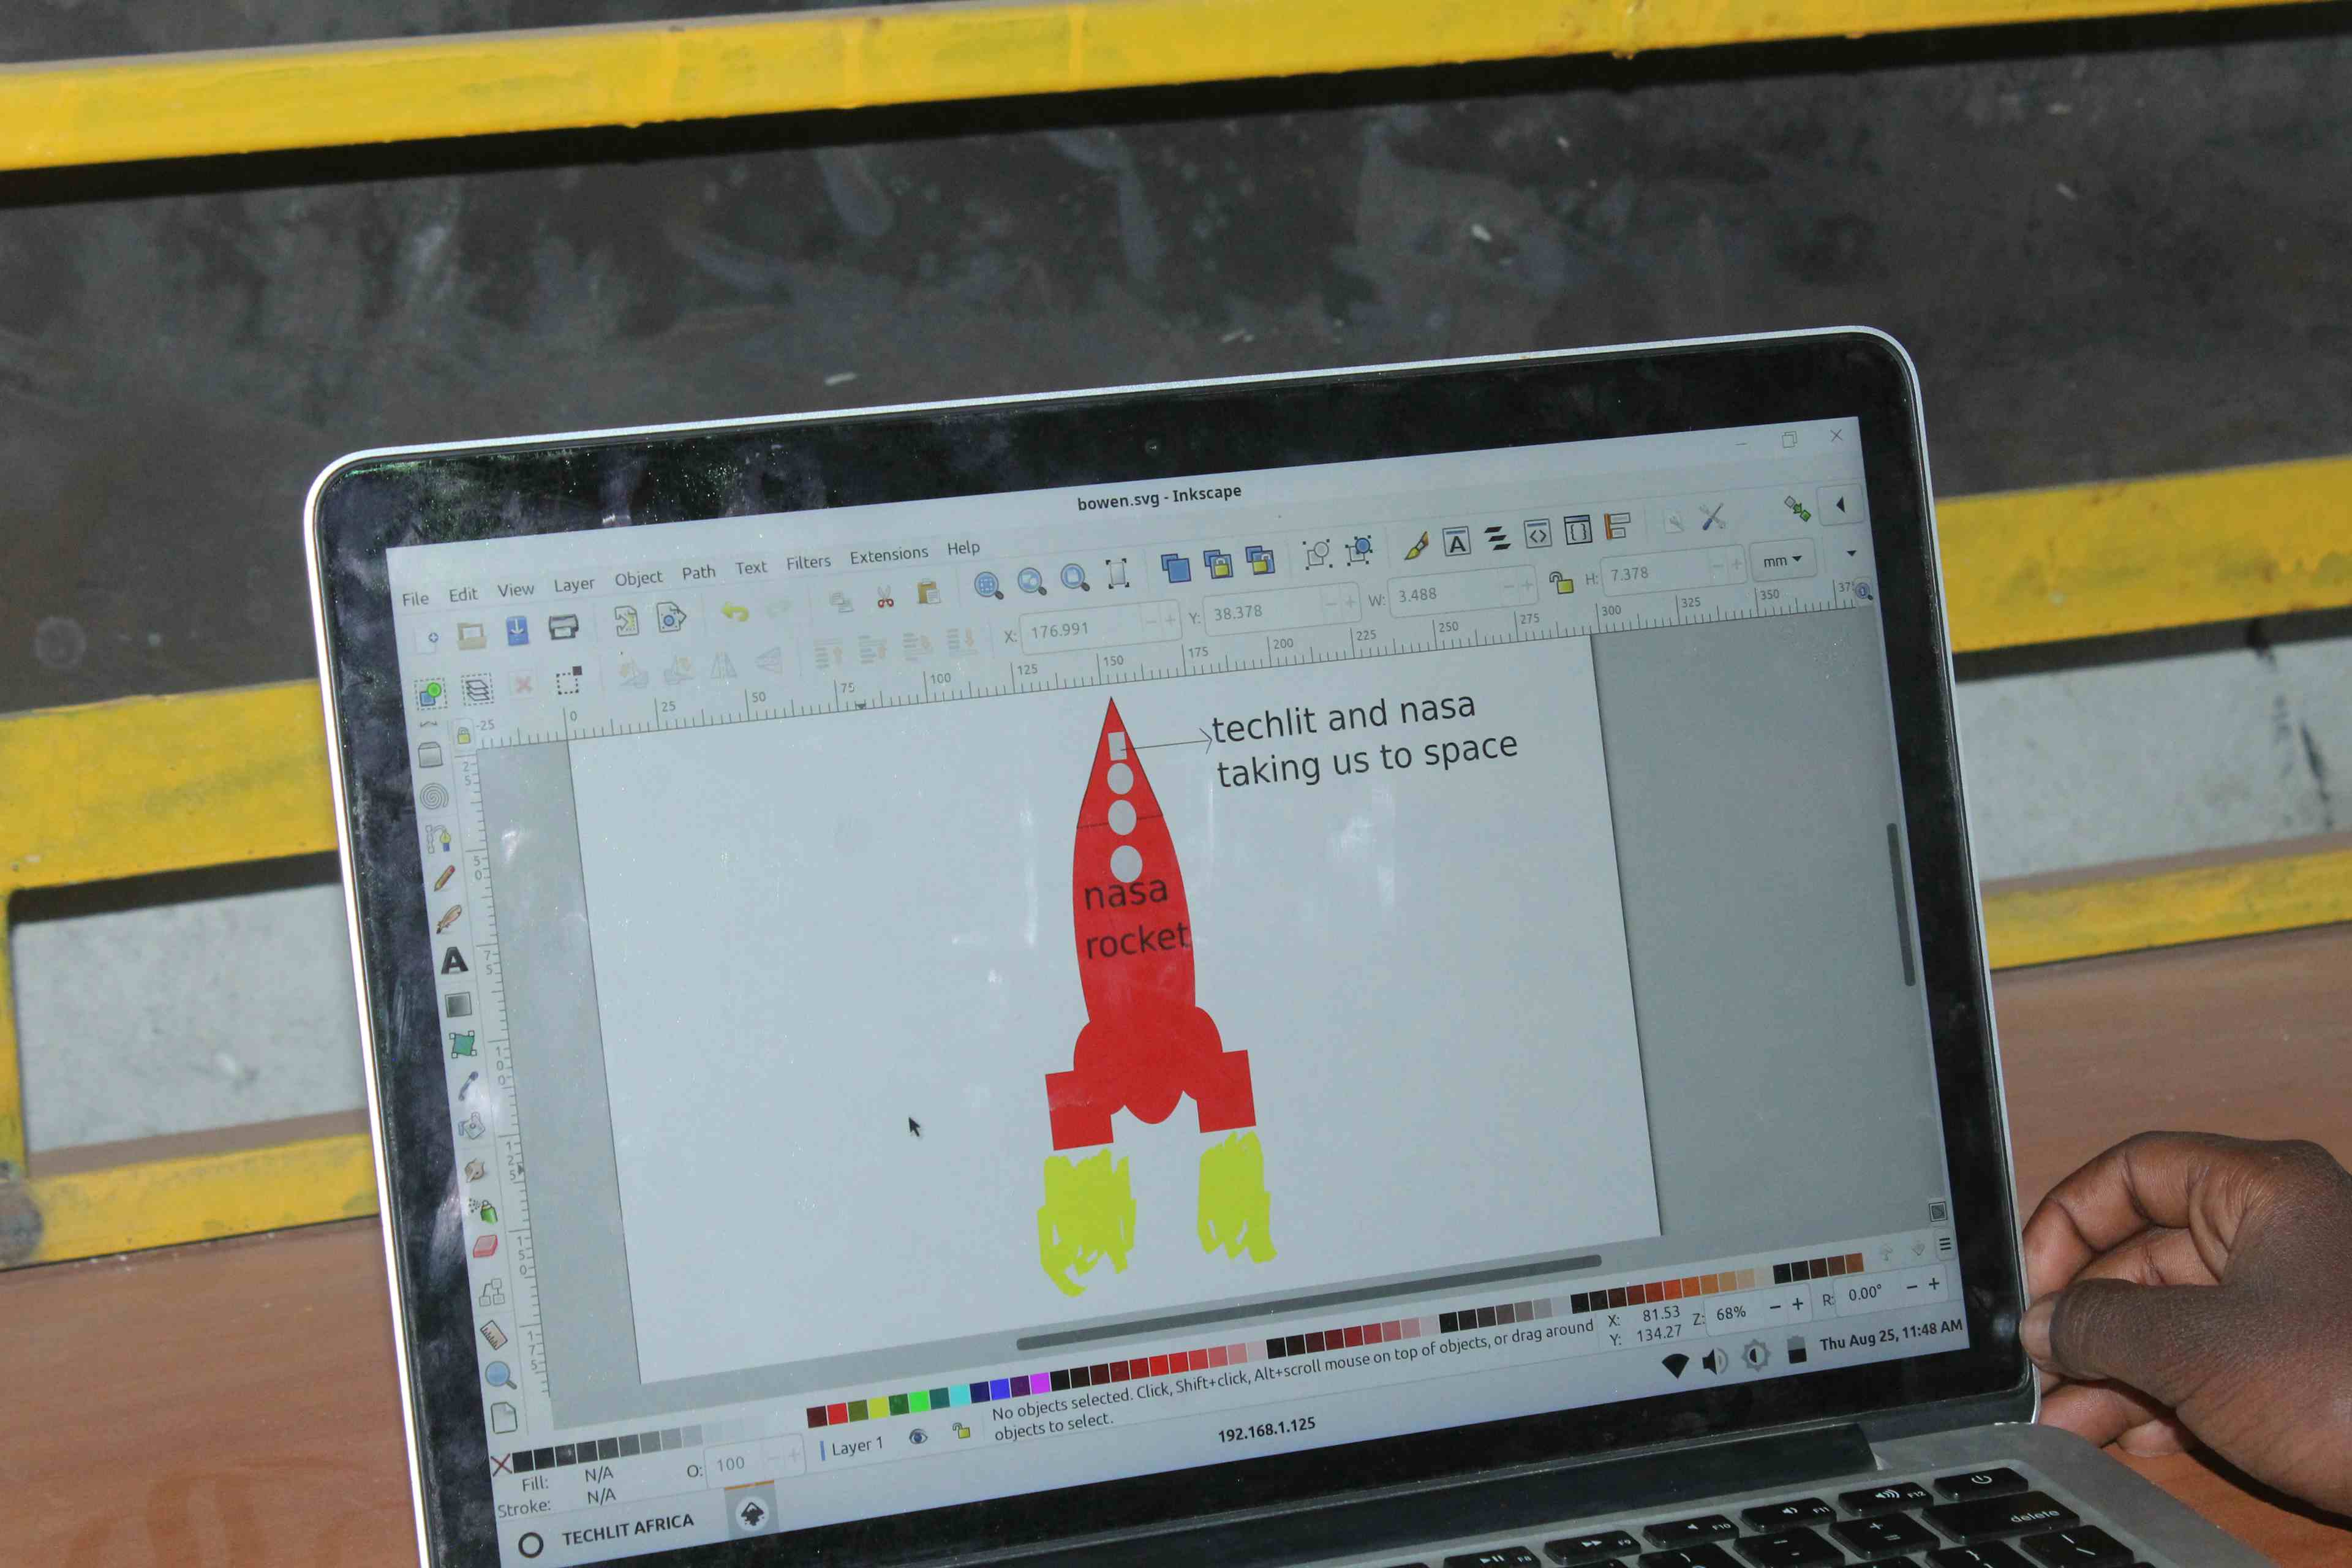 An Inkscape screen showing a rocket with works TechLit and Nasa taking us to space